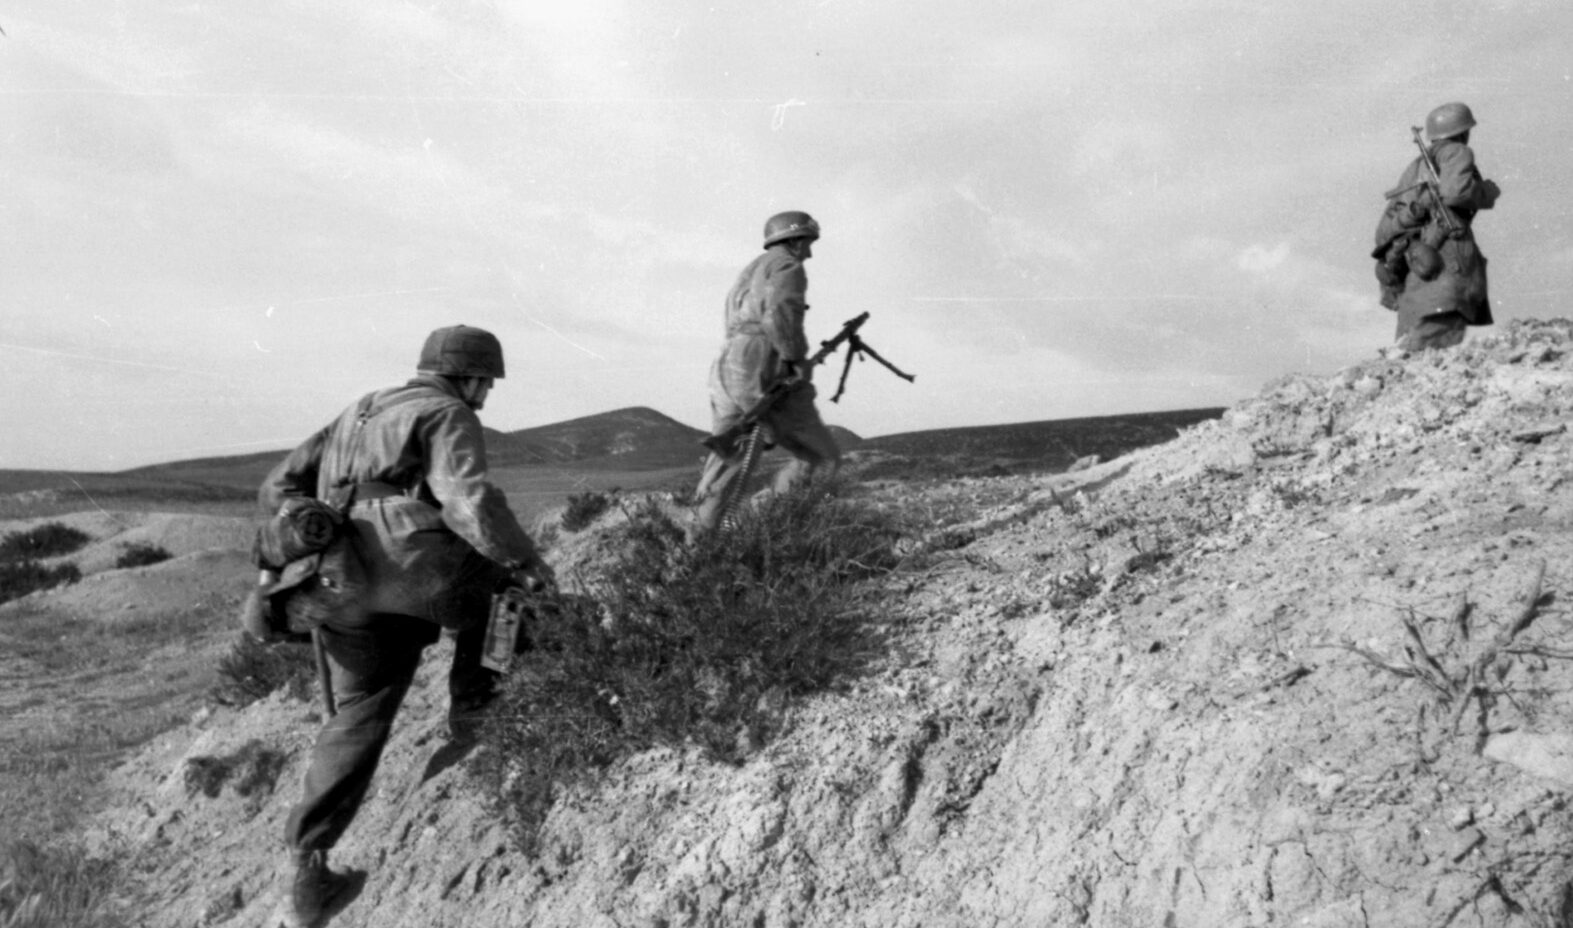 Members of the German 1st Parachute Division dash to a new position during the battle for Sicily. Unlike the Italians, the Germans did not give up ground easily.